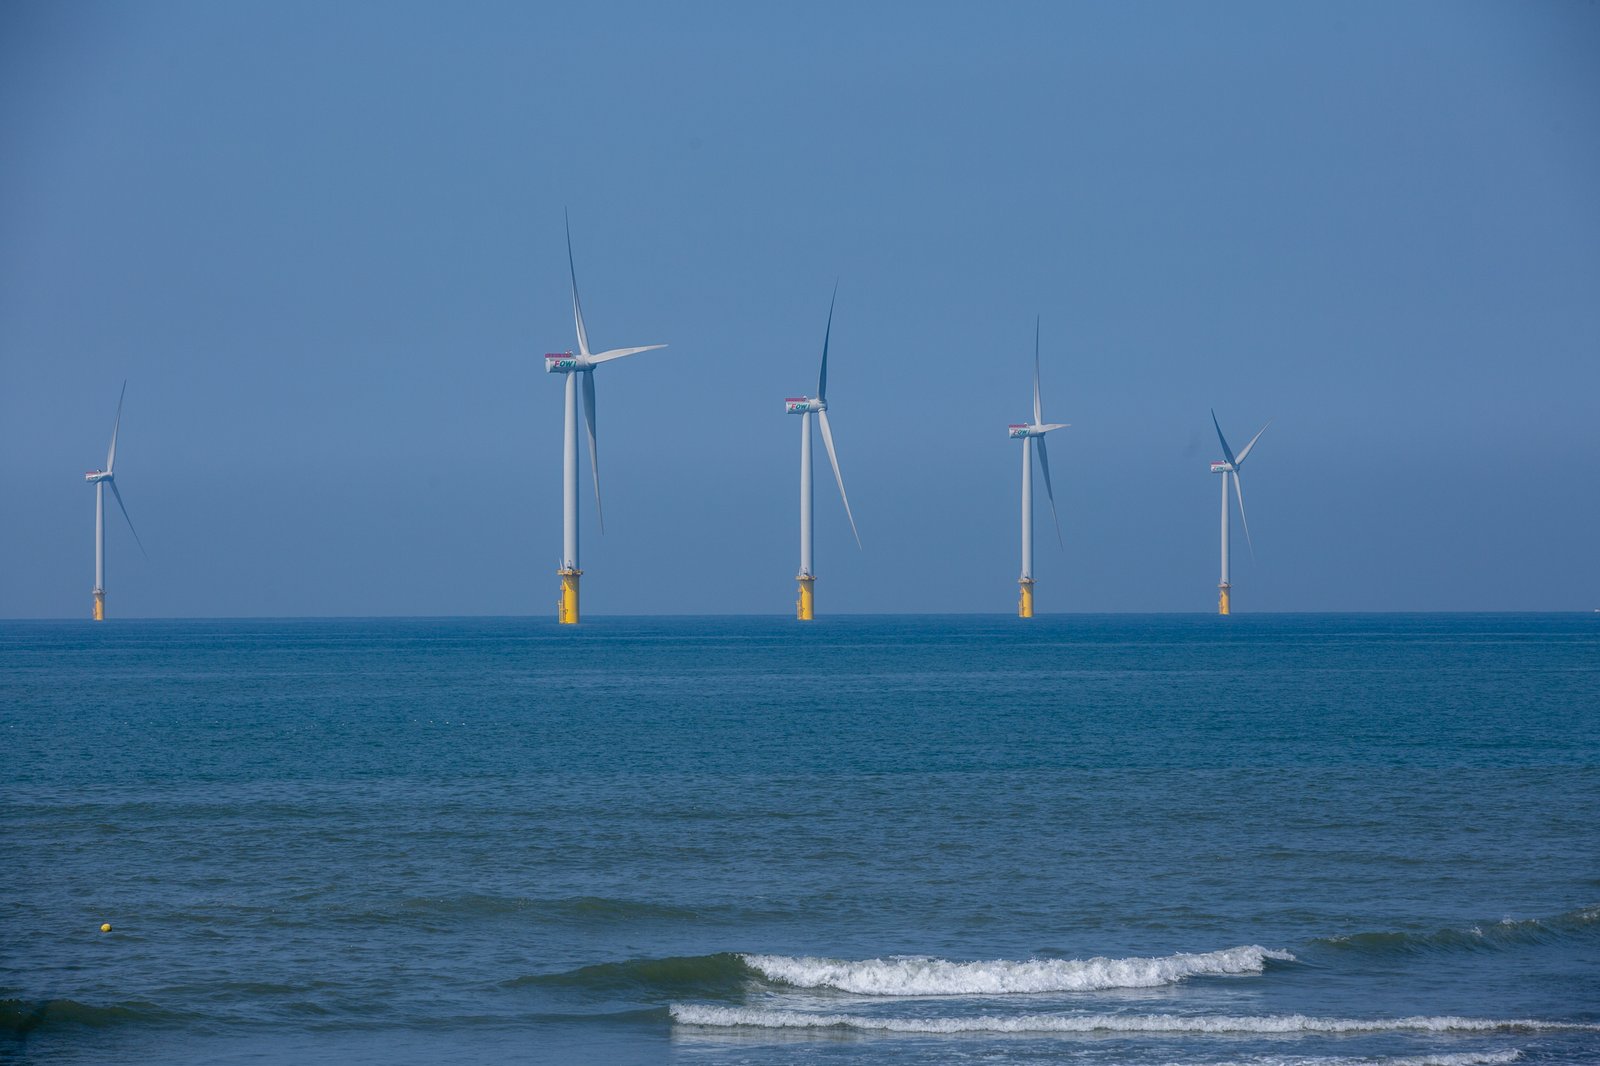 China offshore wind turbine farm facts about wind energy